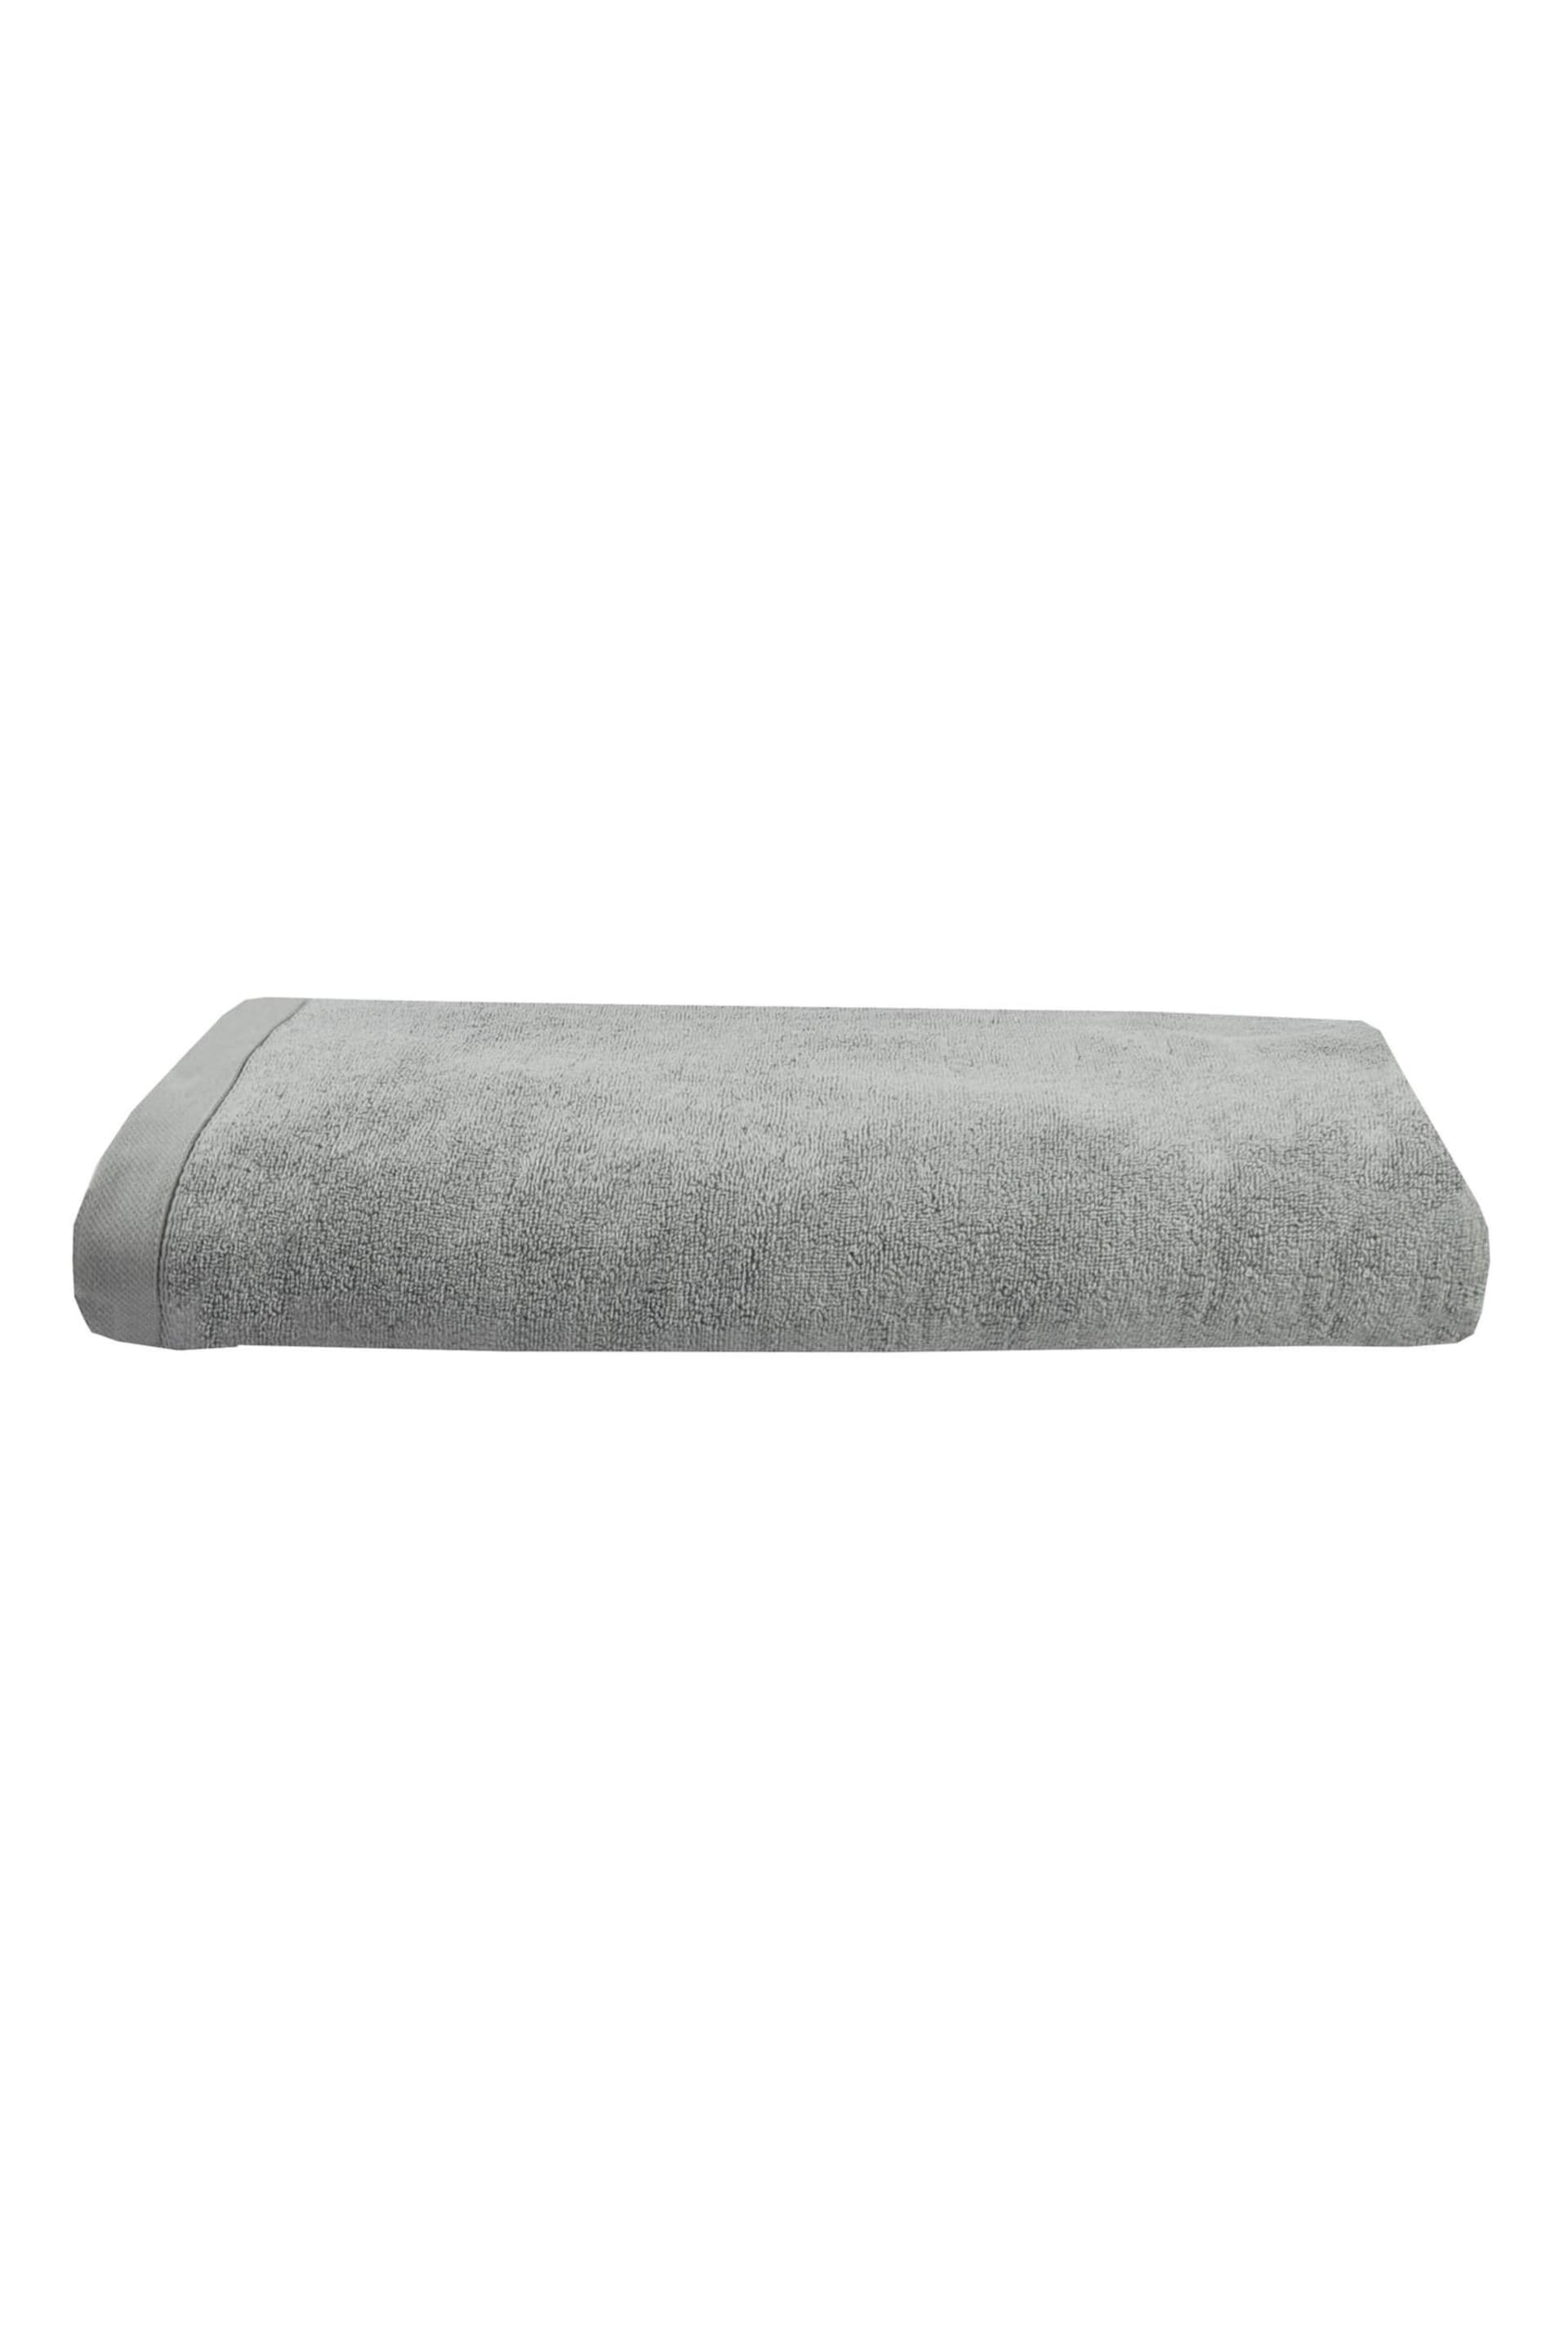 Drift Home Grey Abode Eco Towel - Image 3 of 6